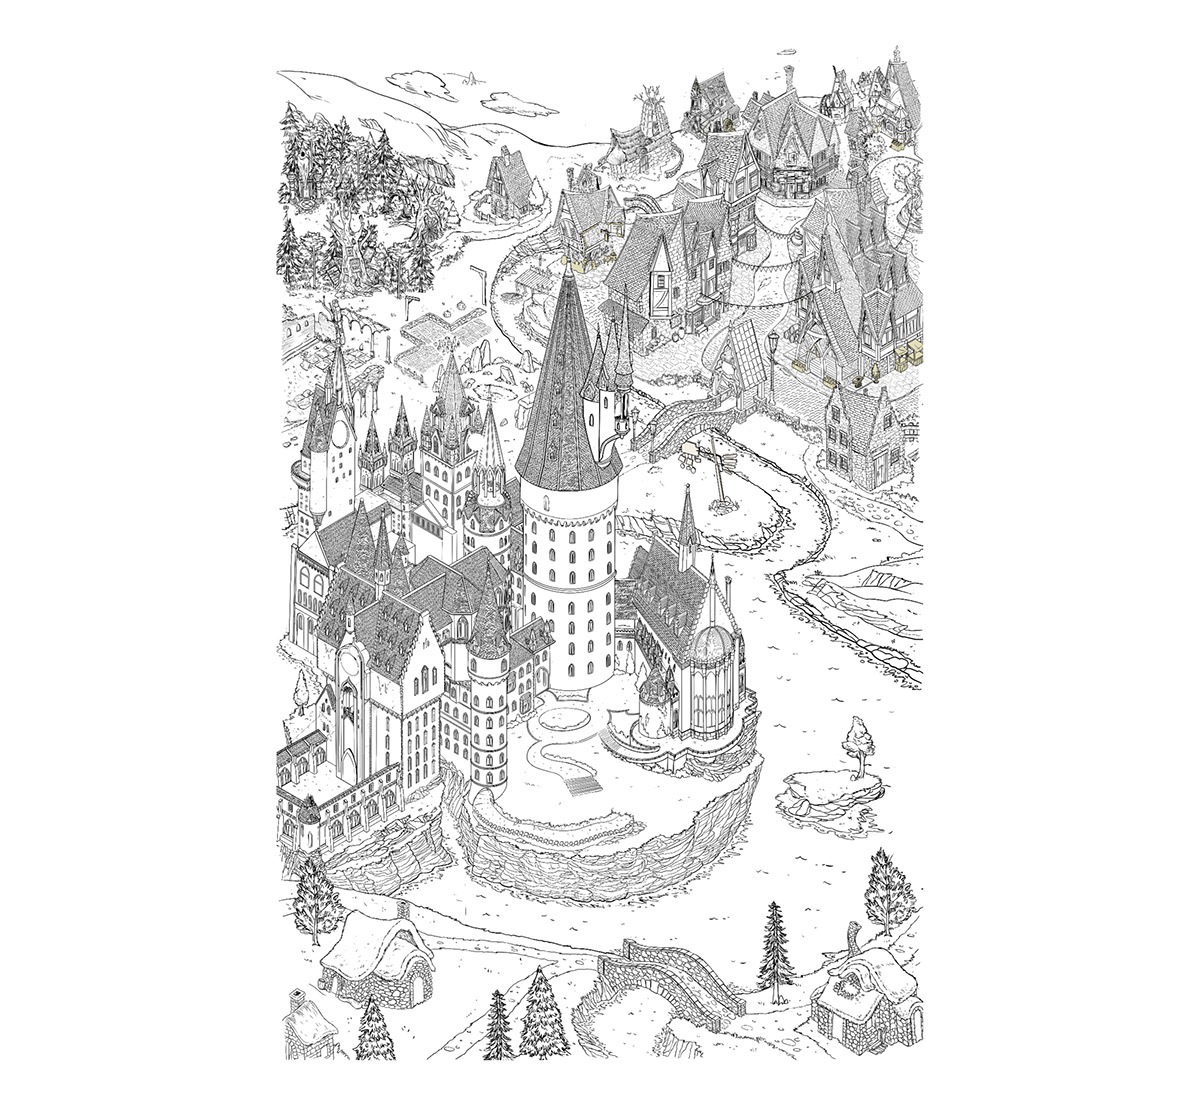 Hogwarts harry potter seek-and-find wheres wally Where's Waldo Castle medieval poster hogwarts legacy search-and-find